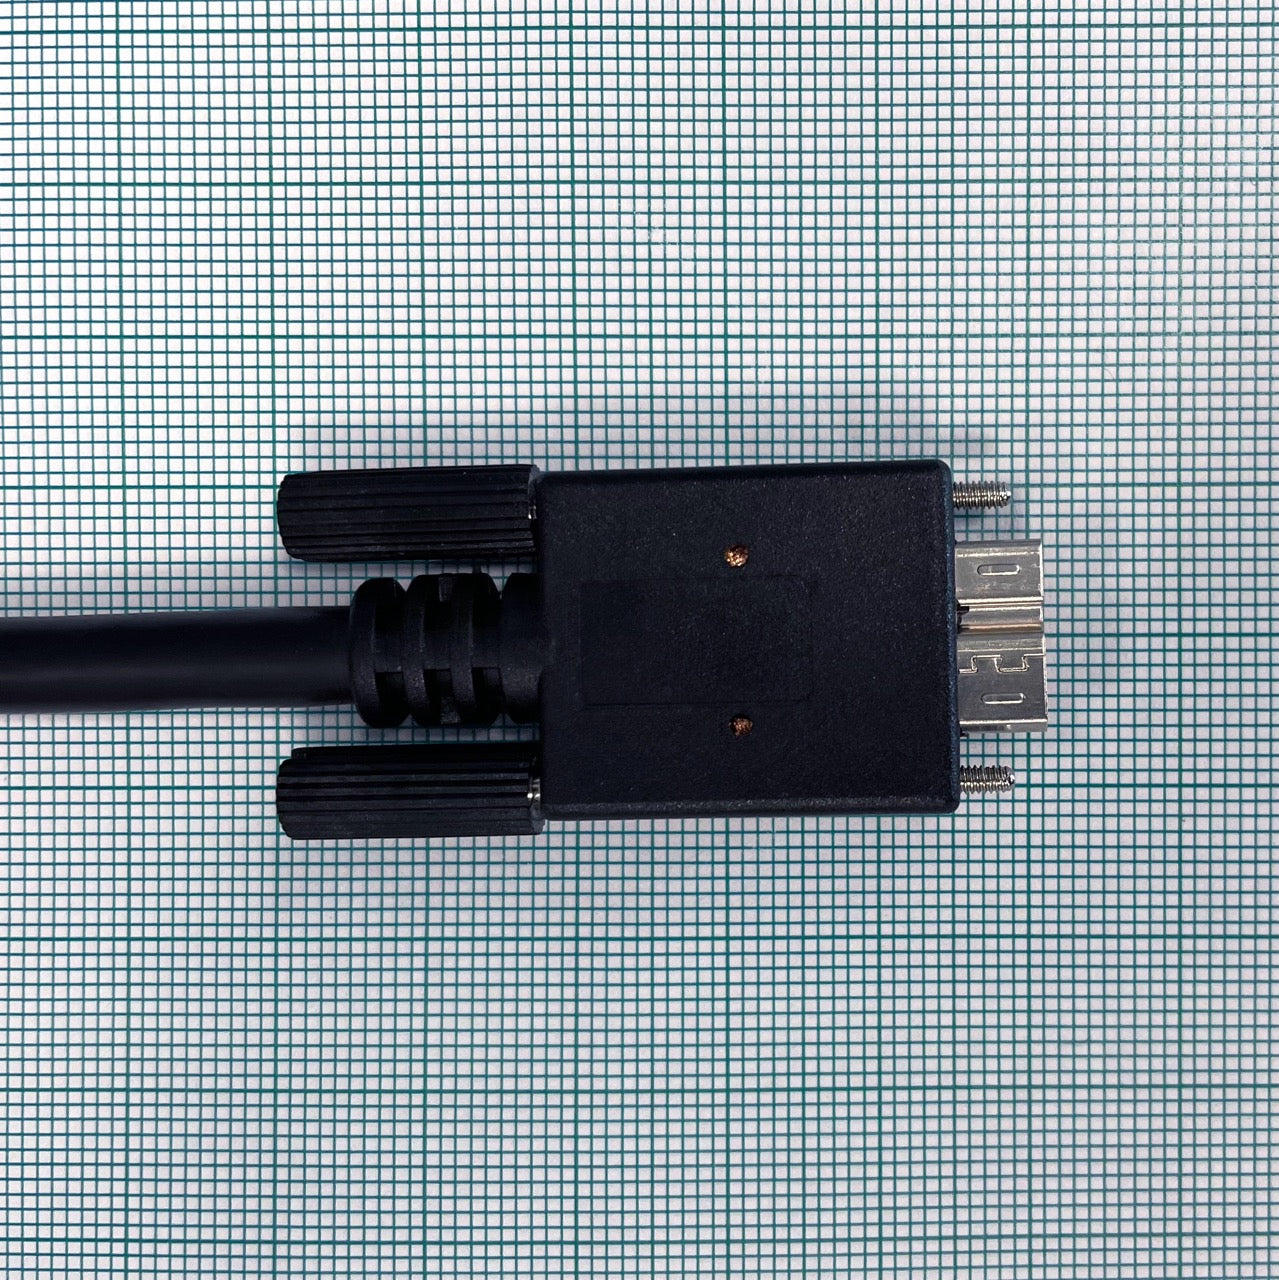 Top view of Type micro B USB 3.0 Vision screw lock connector